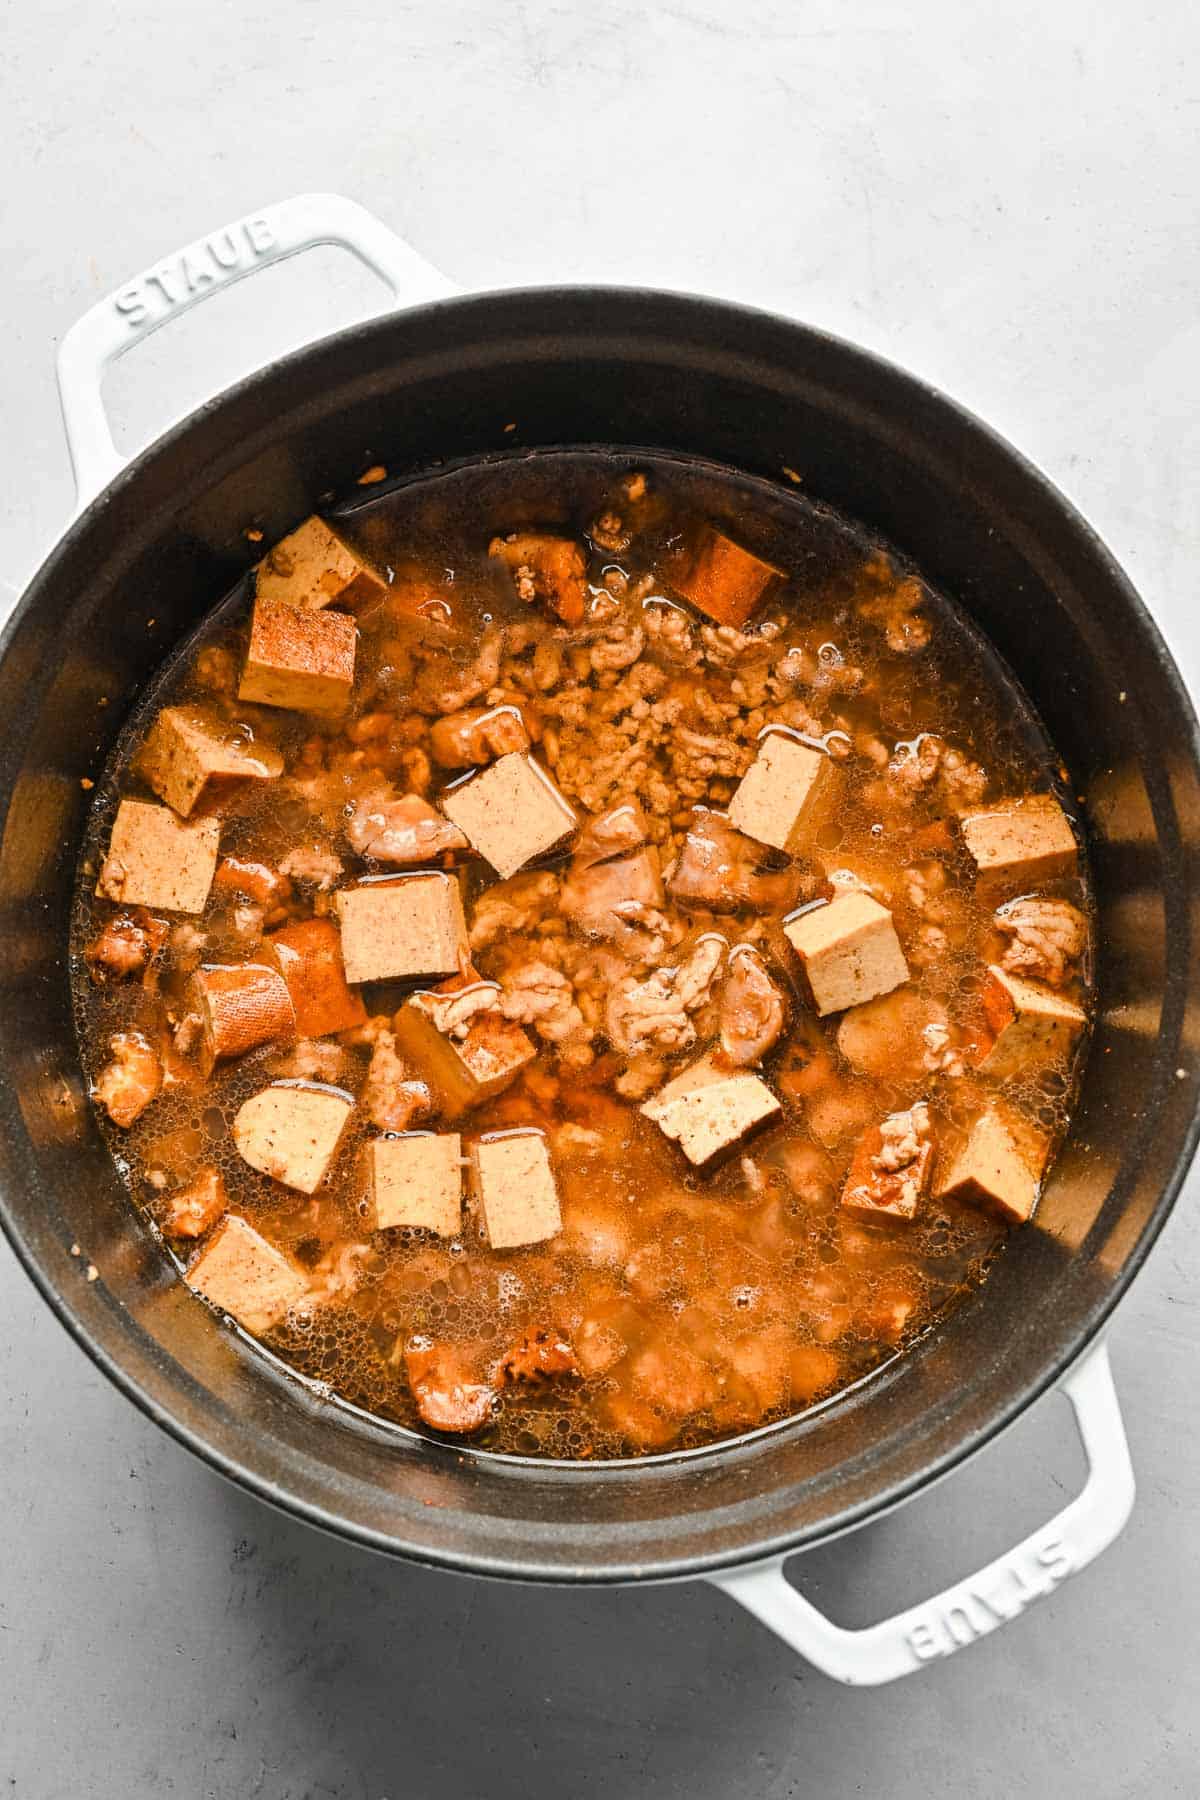 Water added to a pot with braised minced pork, mushrooms, and tofu.